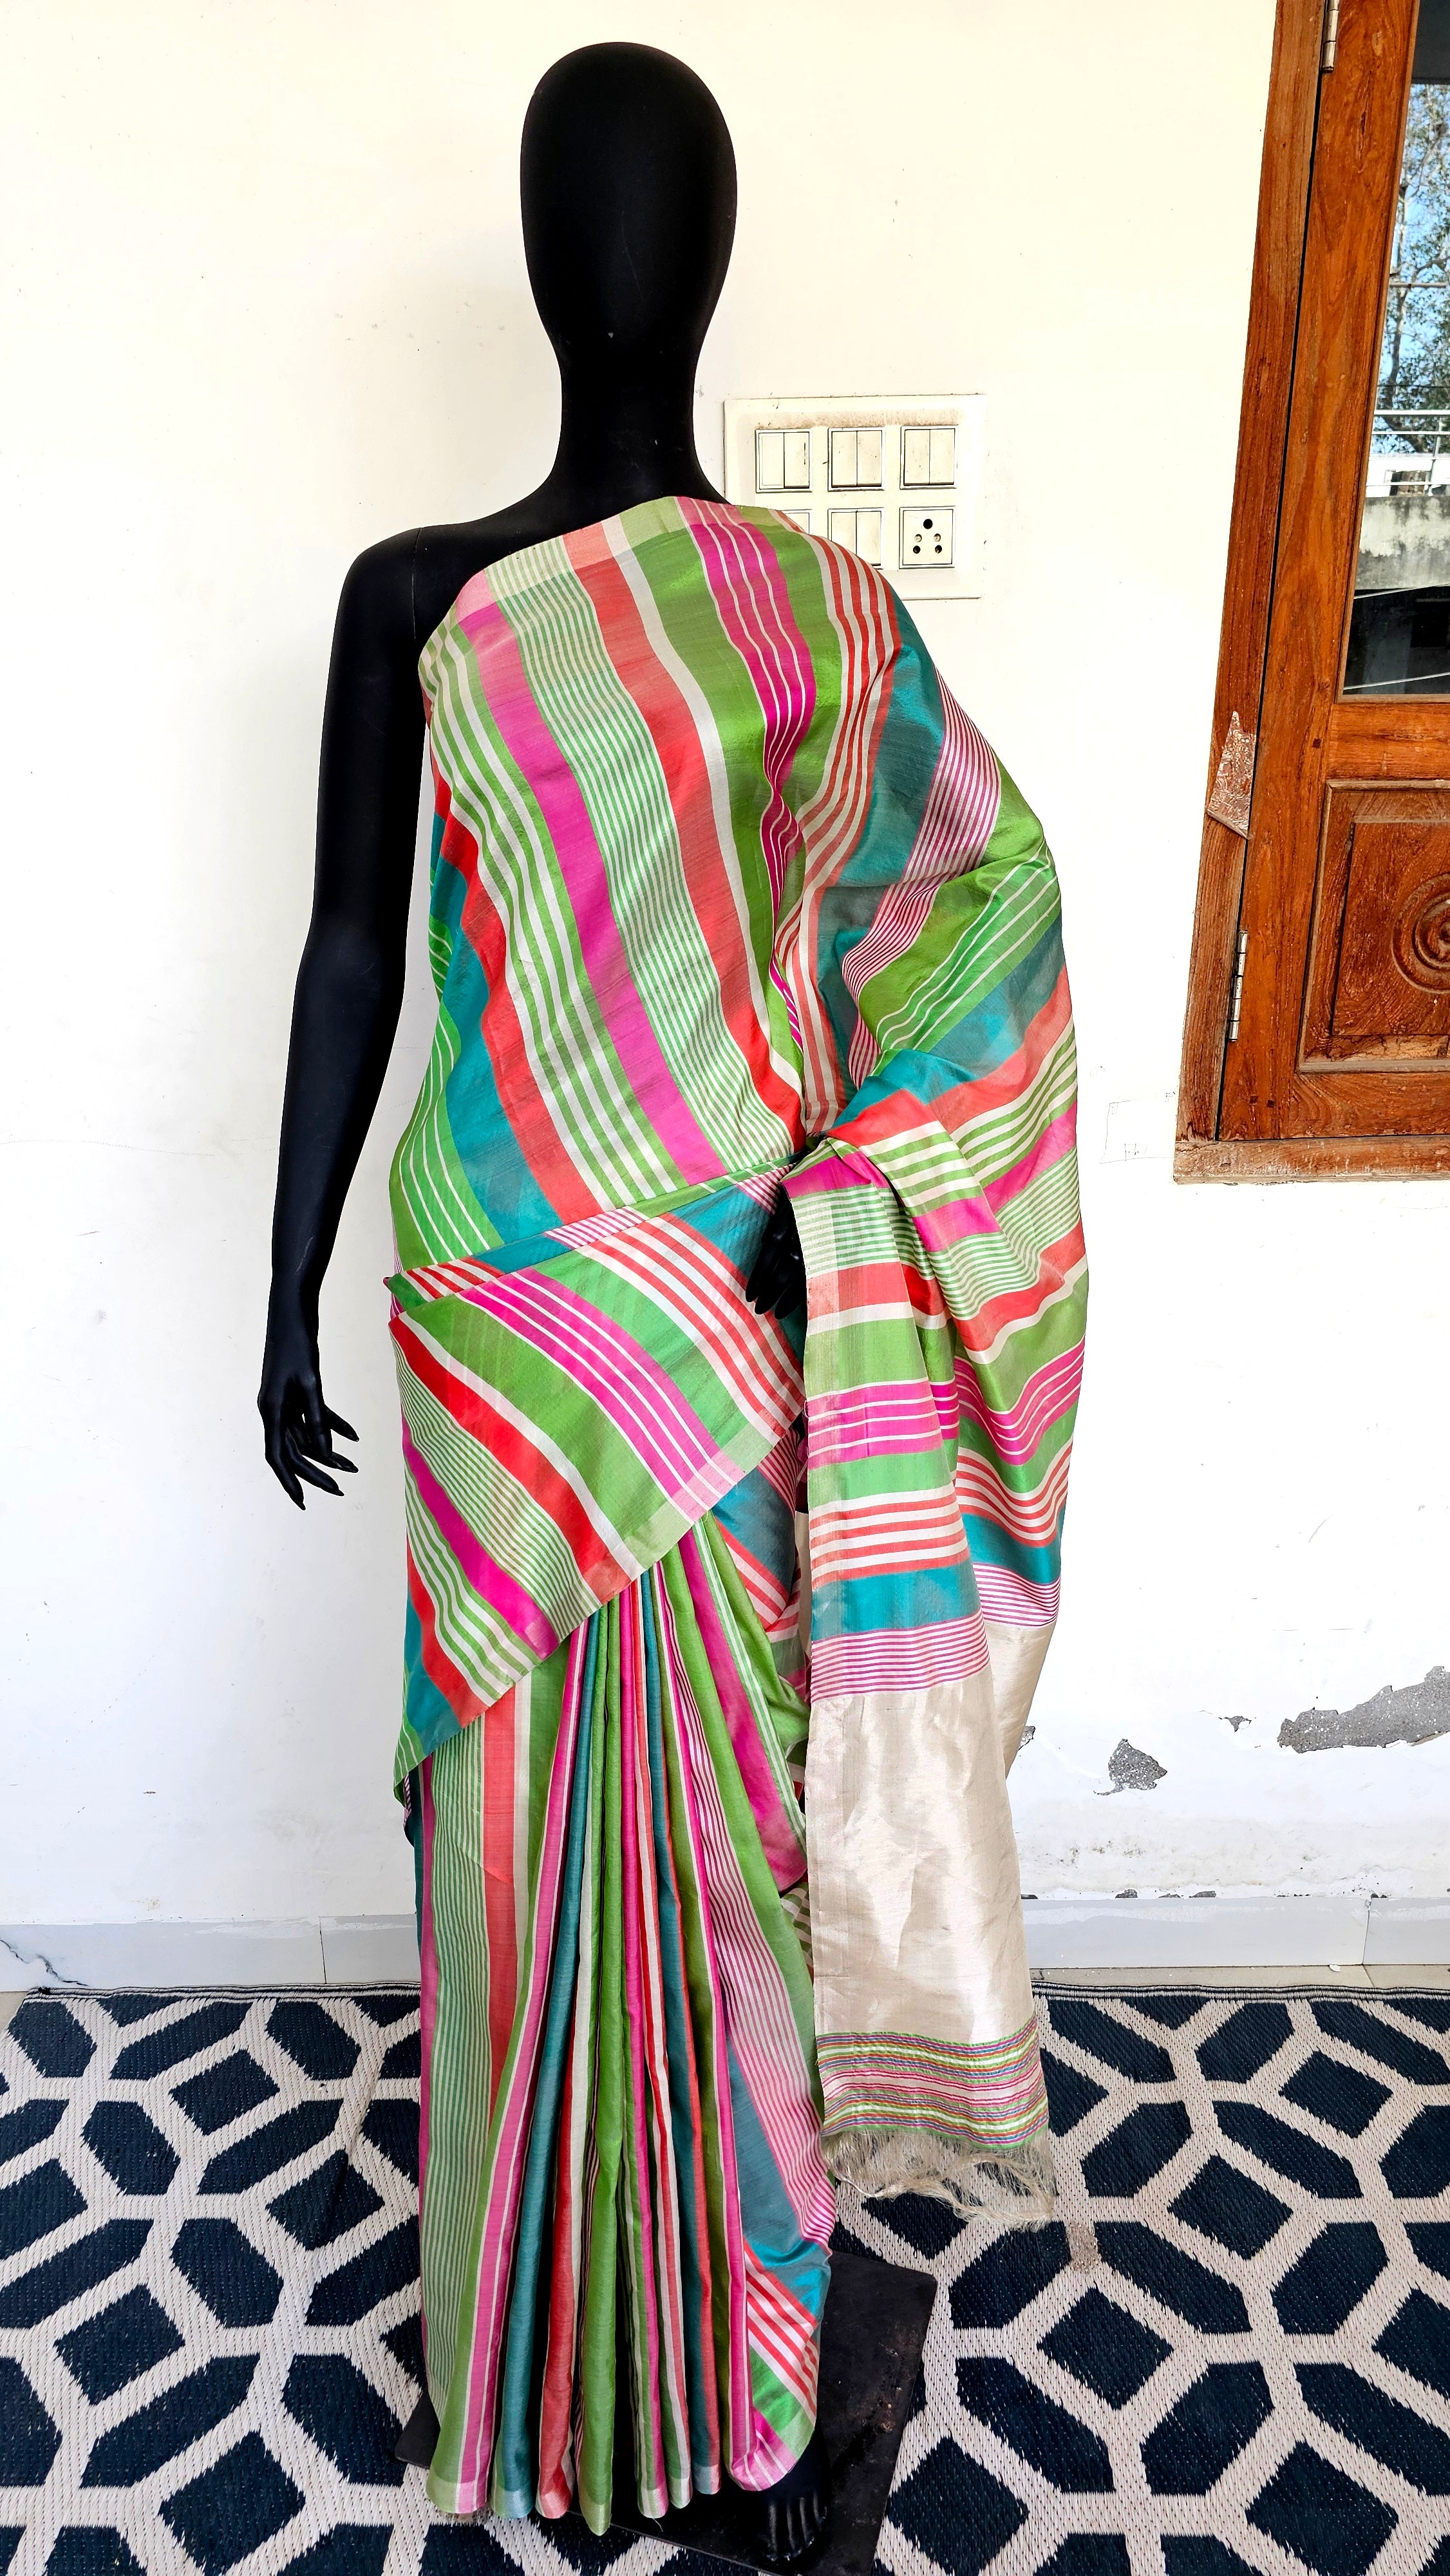 Silk×Silk Saree with 6 color uneven weft stripes.